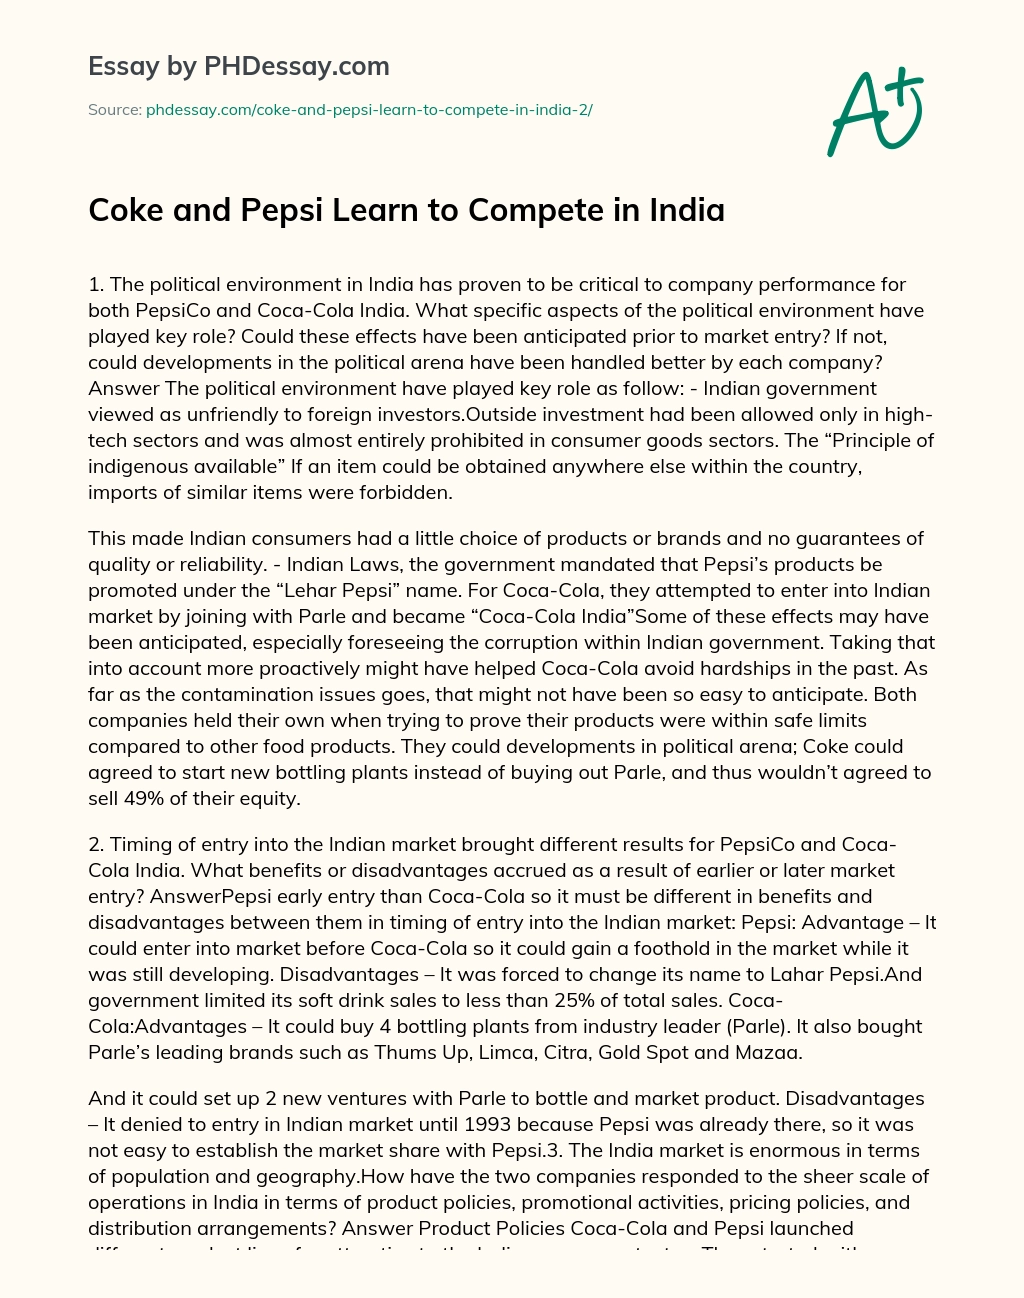 Coke and Pepsi Learn to Compete in India essay